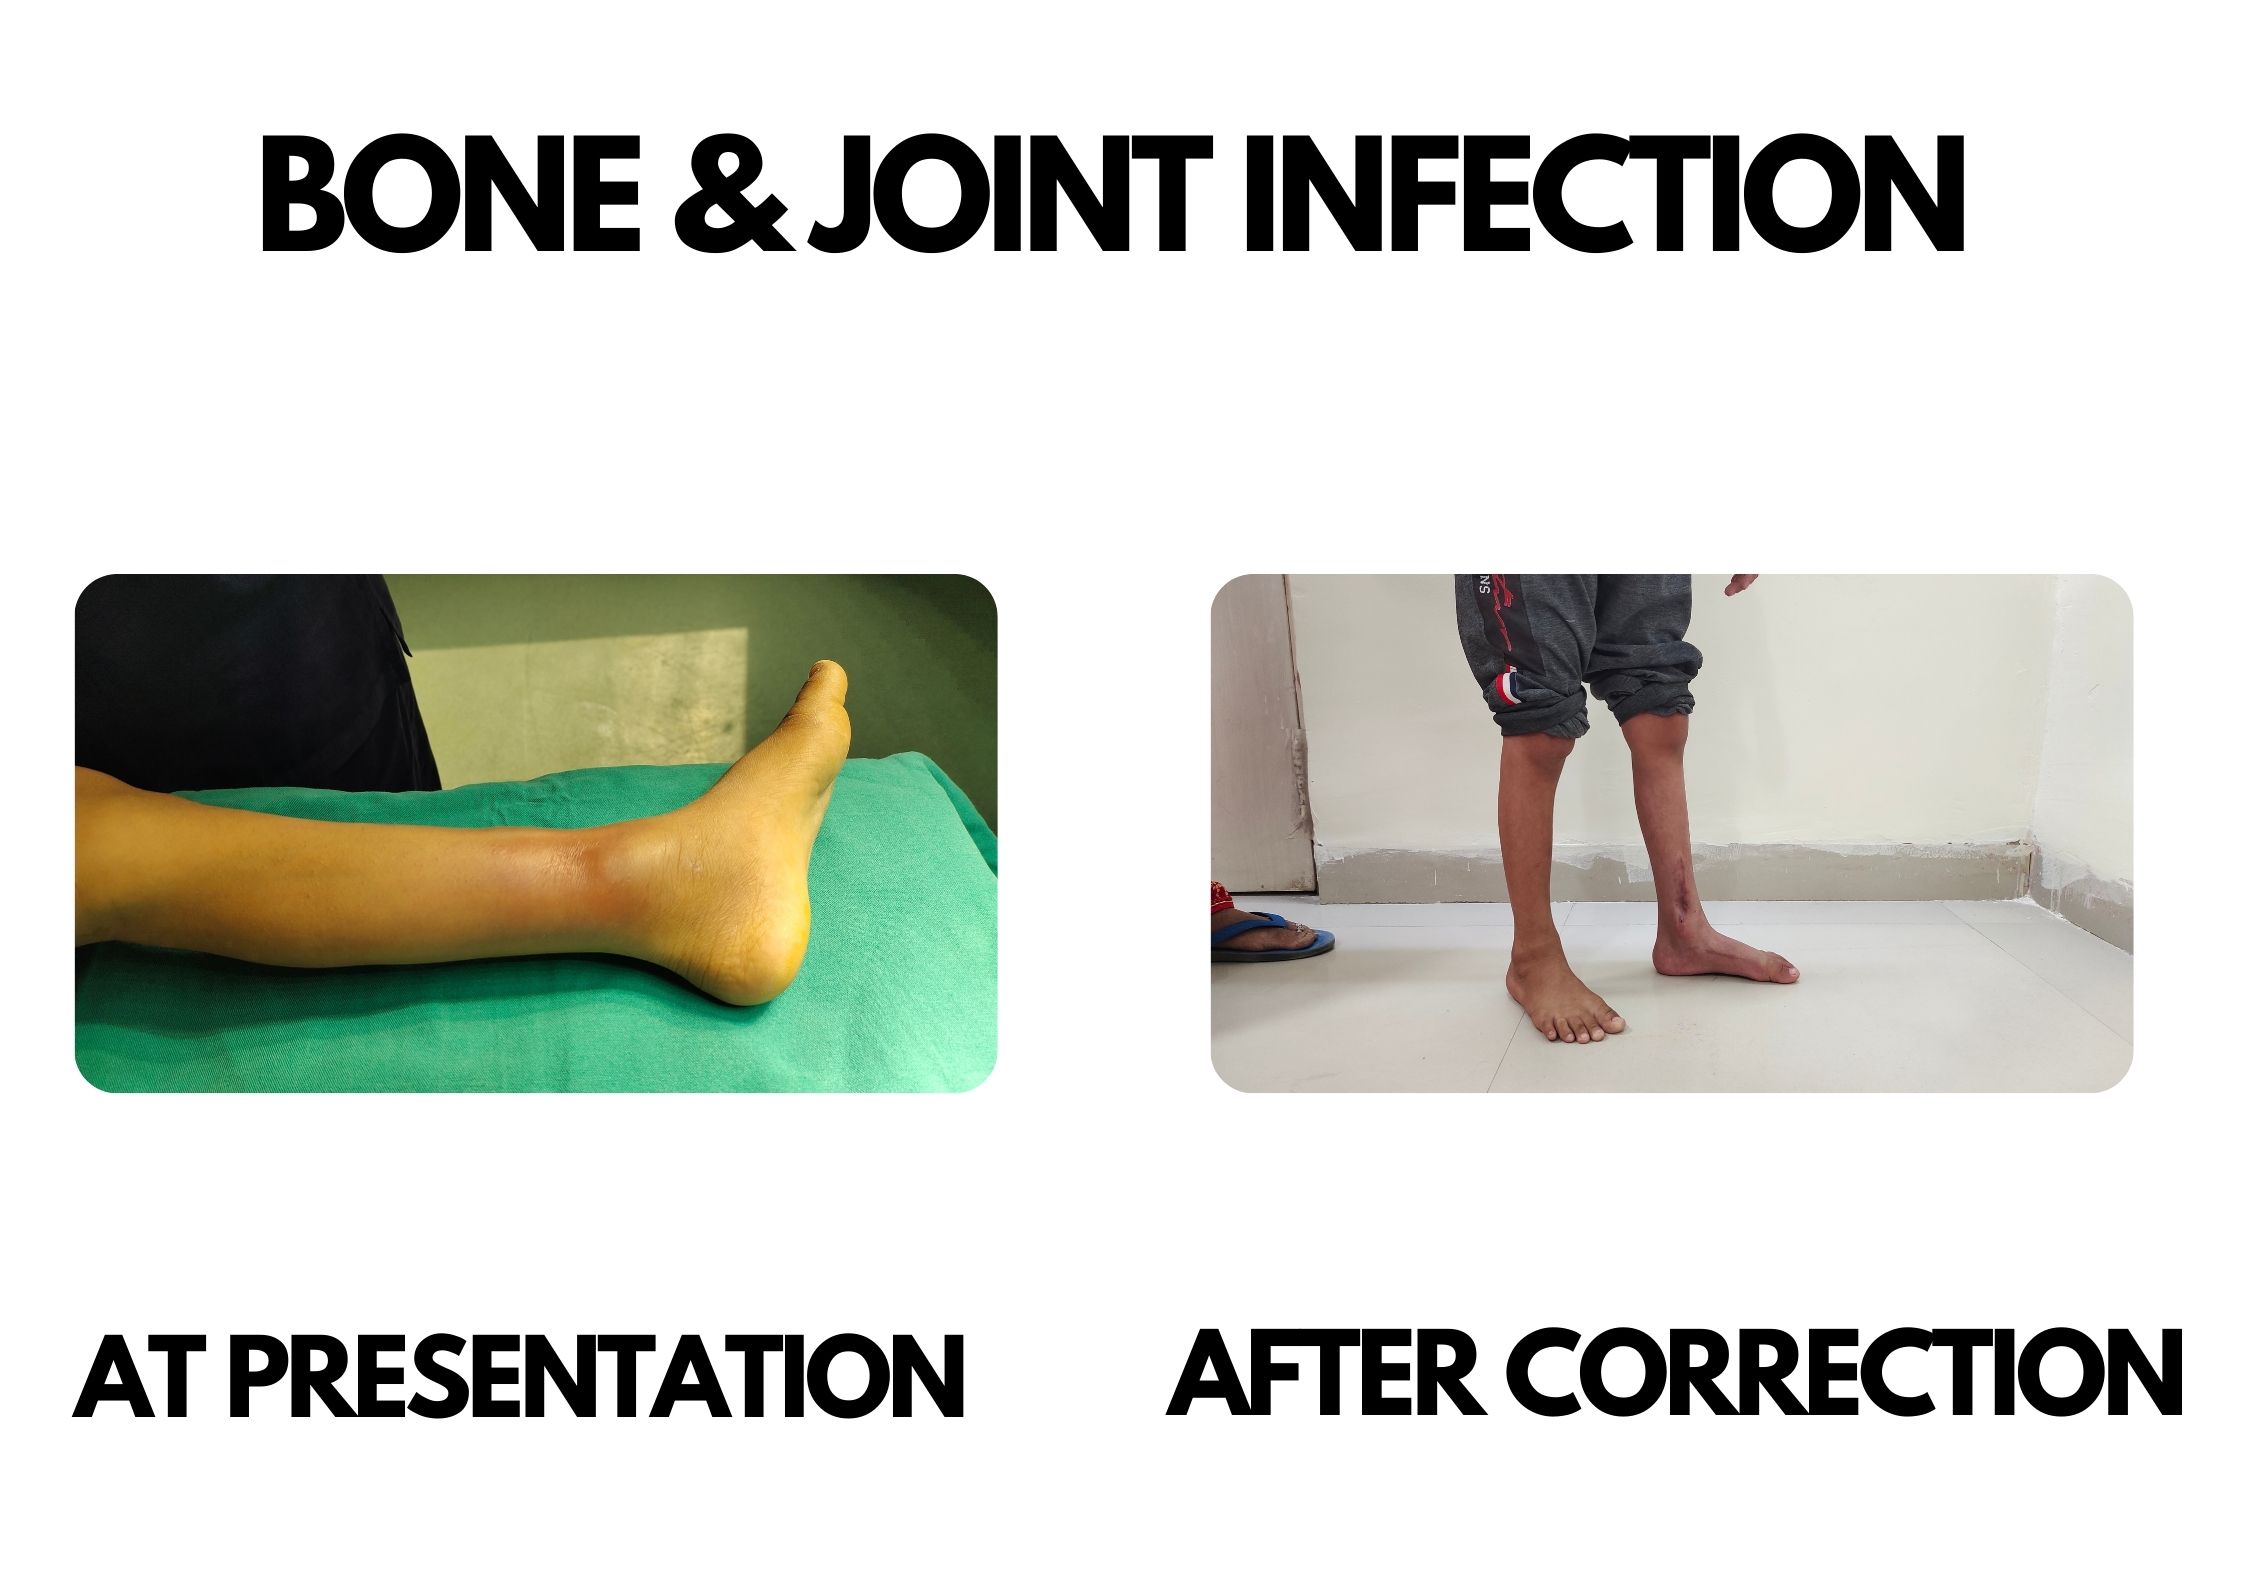 Bones and Joint Infection